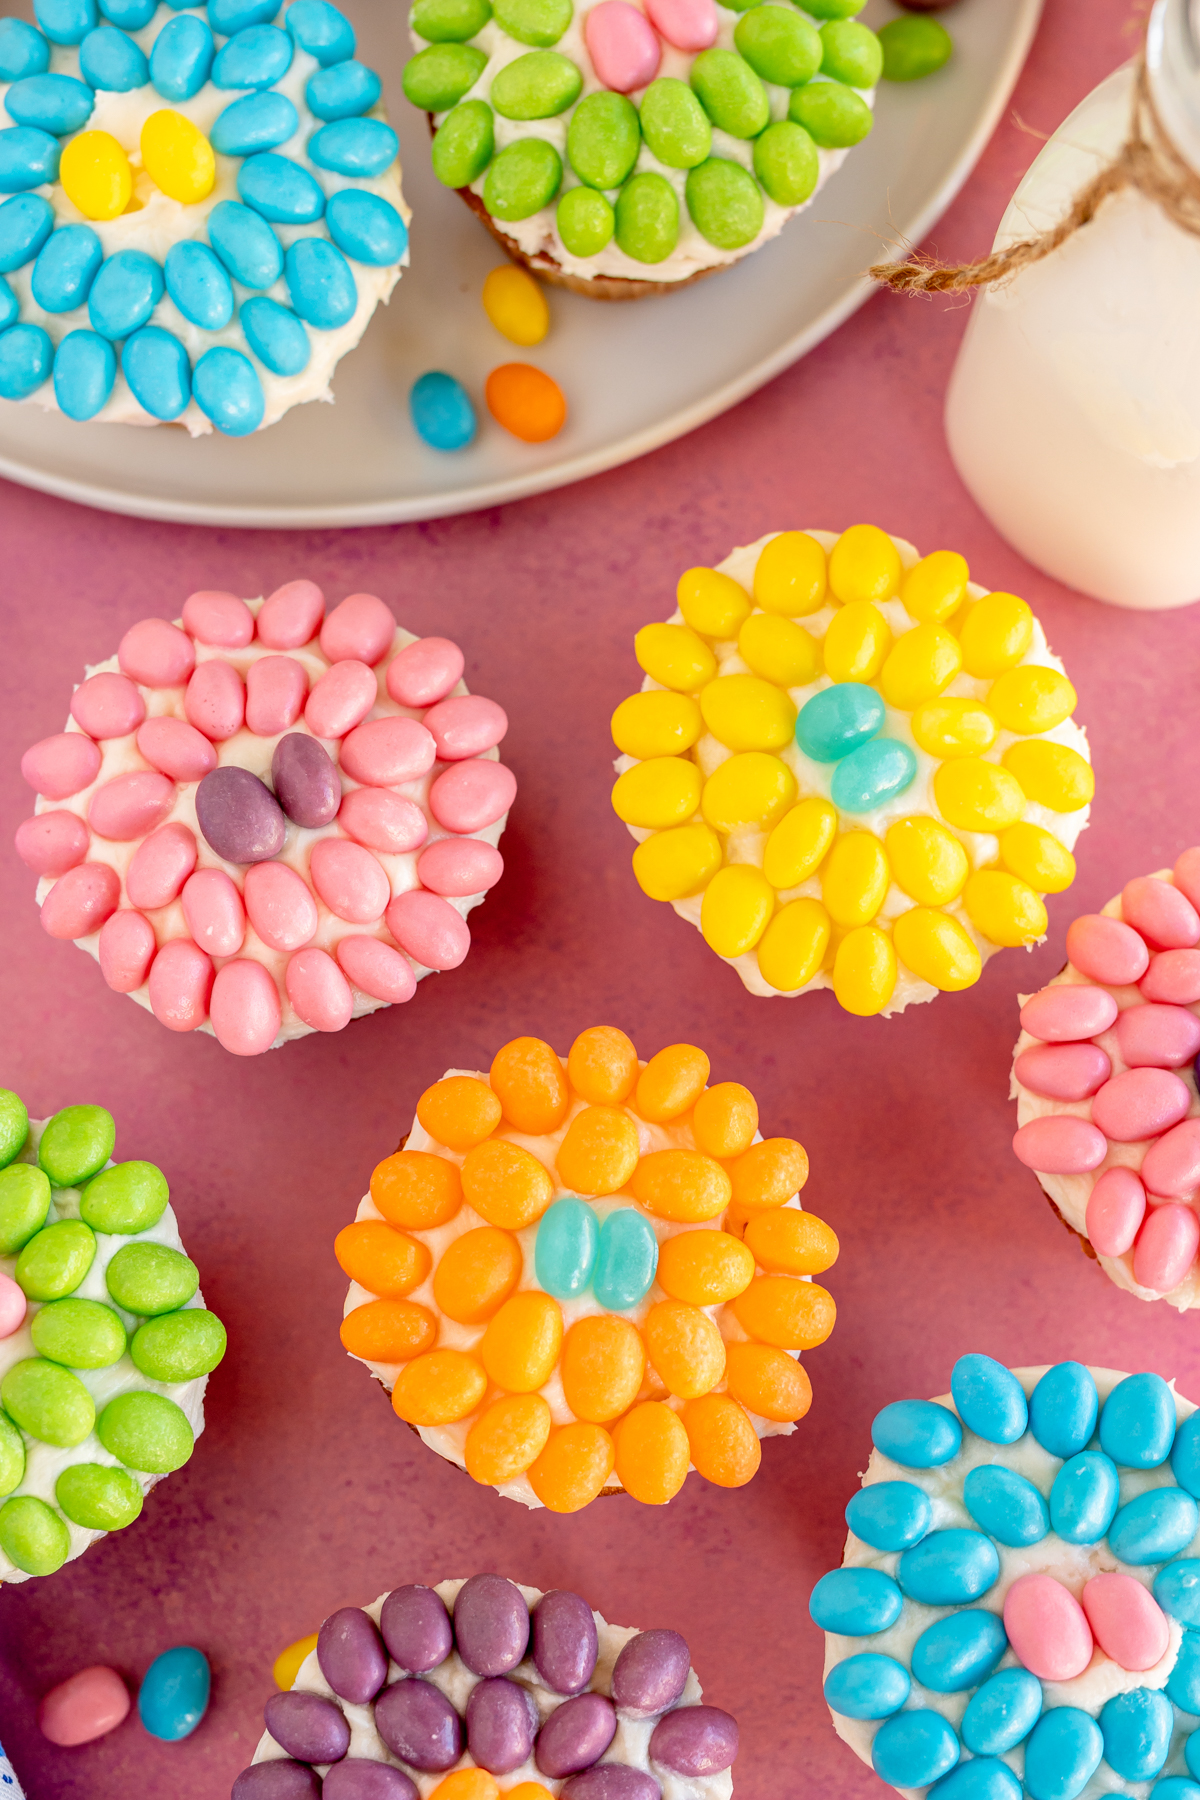 flower cupcakes made with jelly beans